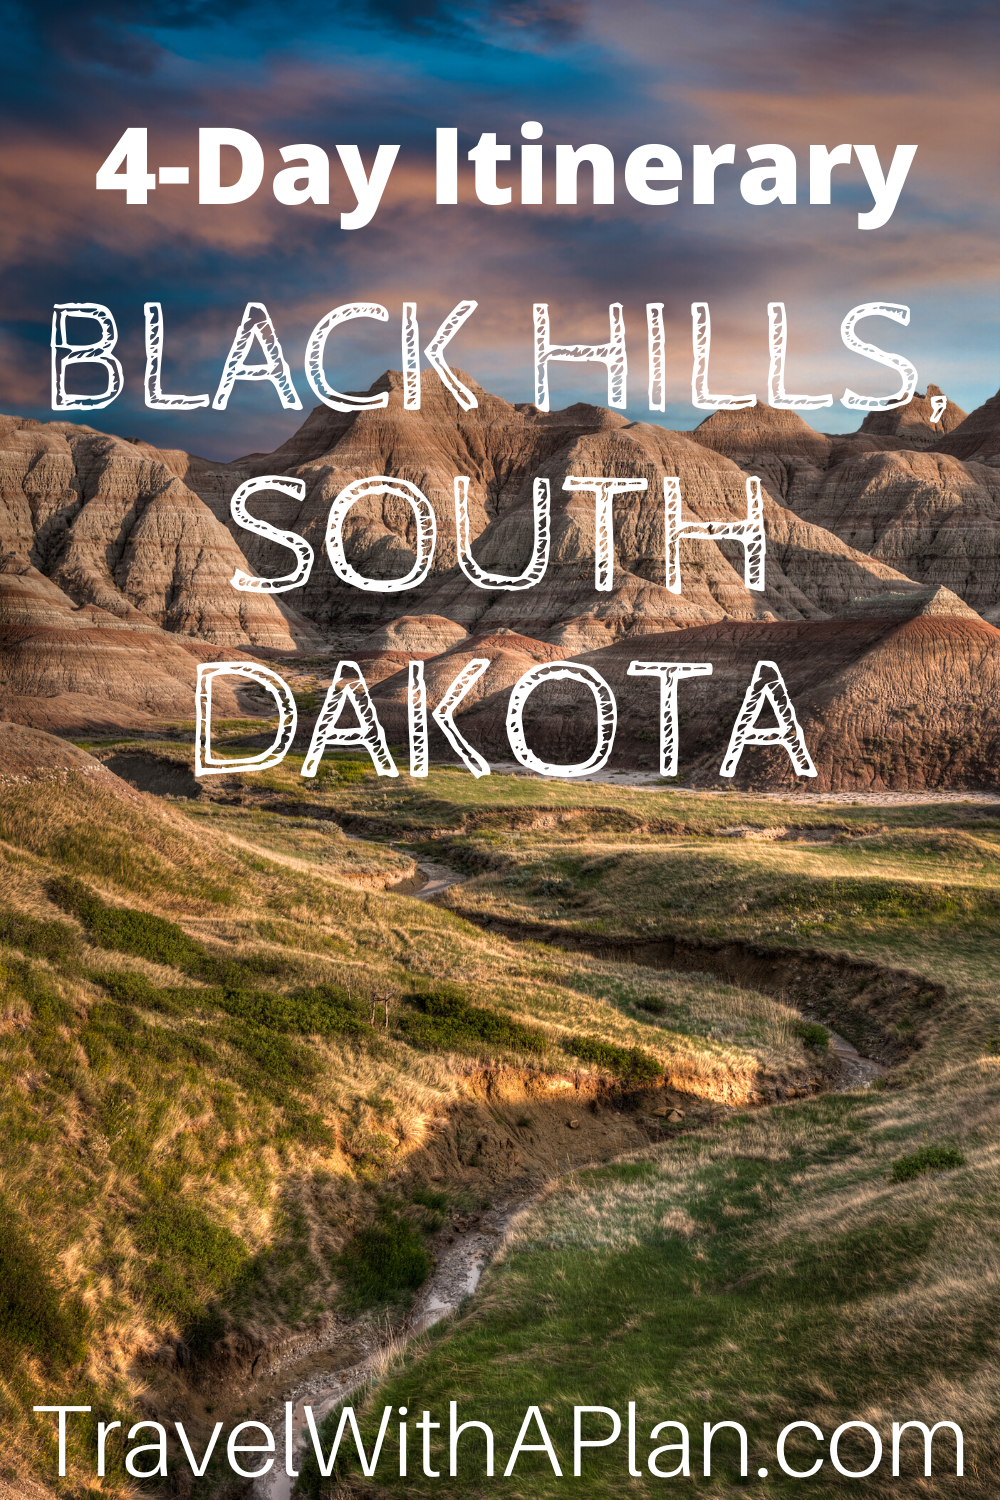 This 4-day Black Hills itinerary includes the best things to do Black Hills for families with children!  Don't miss any of the iconic sights and attractions that makes this one of the most popular U.S. bucket list destination!  We ordered the sights and attractions perfectly!  #blackhillsitinerary #bestthingstodointheblackhills #thingstodointheBlackHills #southdakotawithkids #blackhillsfamilyvacation #4dayblackhillsitinerary